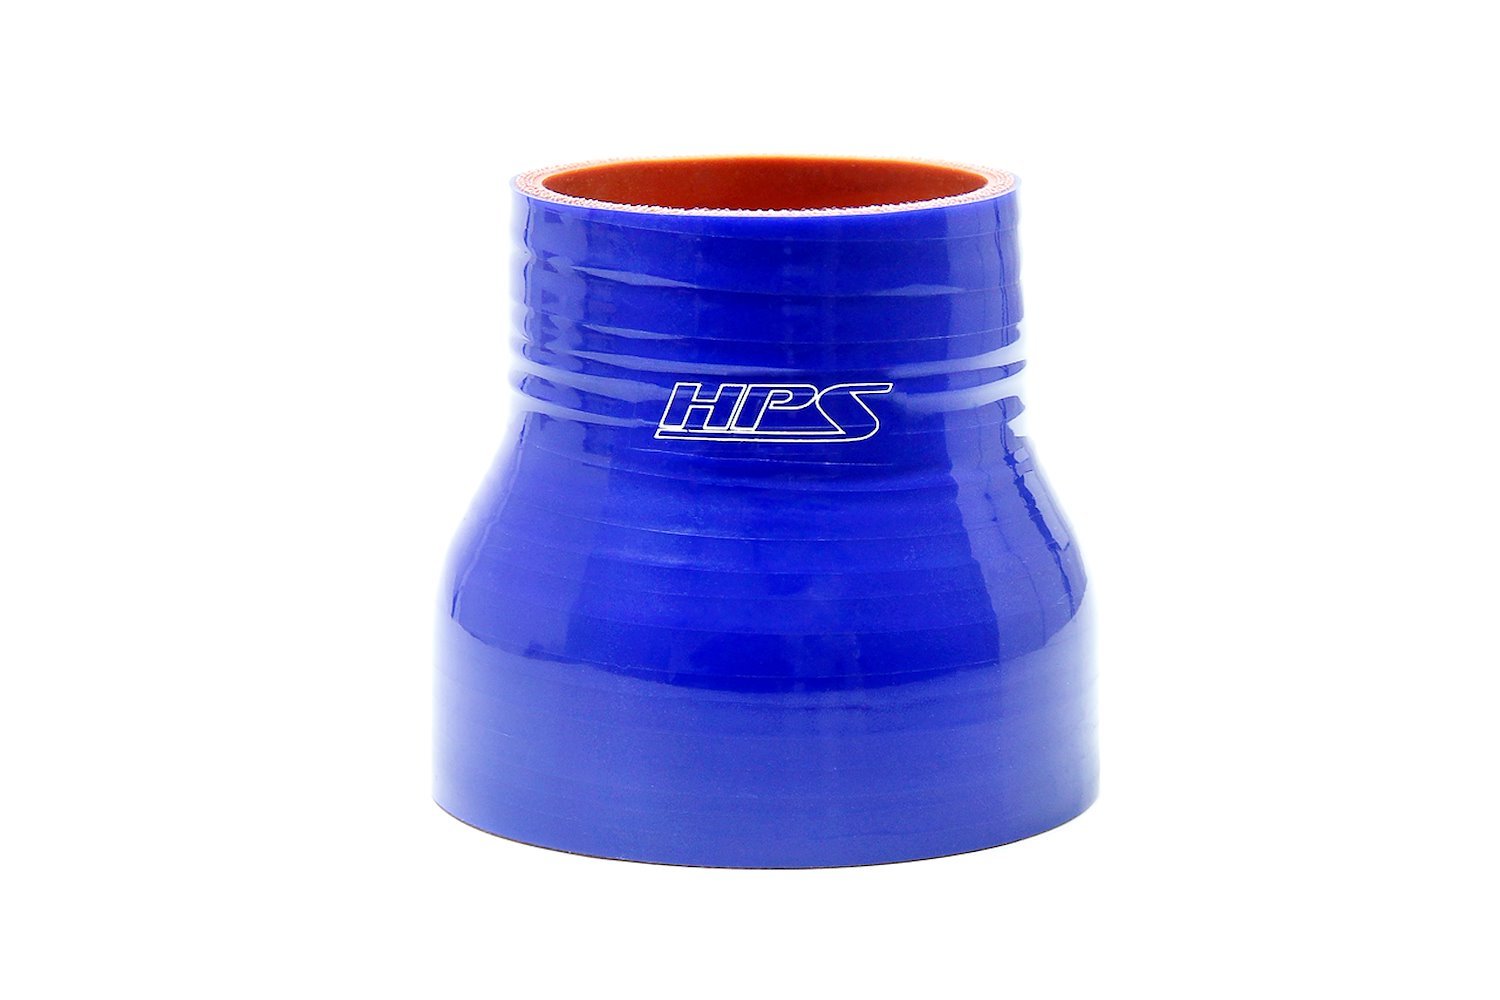 HTSR-150-175-L4-BLUE Silicone Reducer Hose, High-Temp 4-Ply Reinforced, 1-1/2 in. - 1-3/4 in. ID, 4 in. Long, Blue